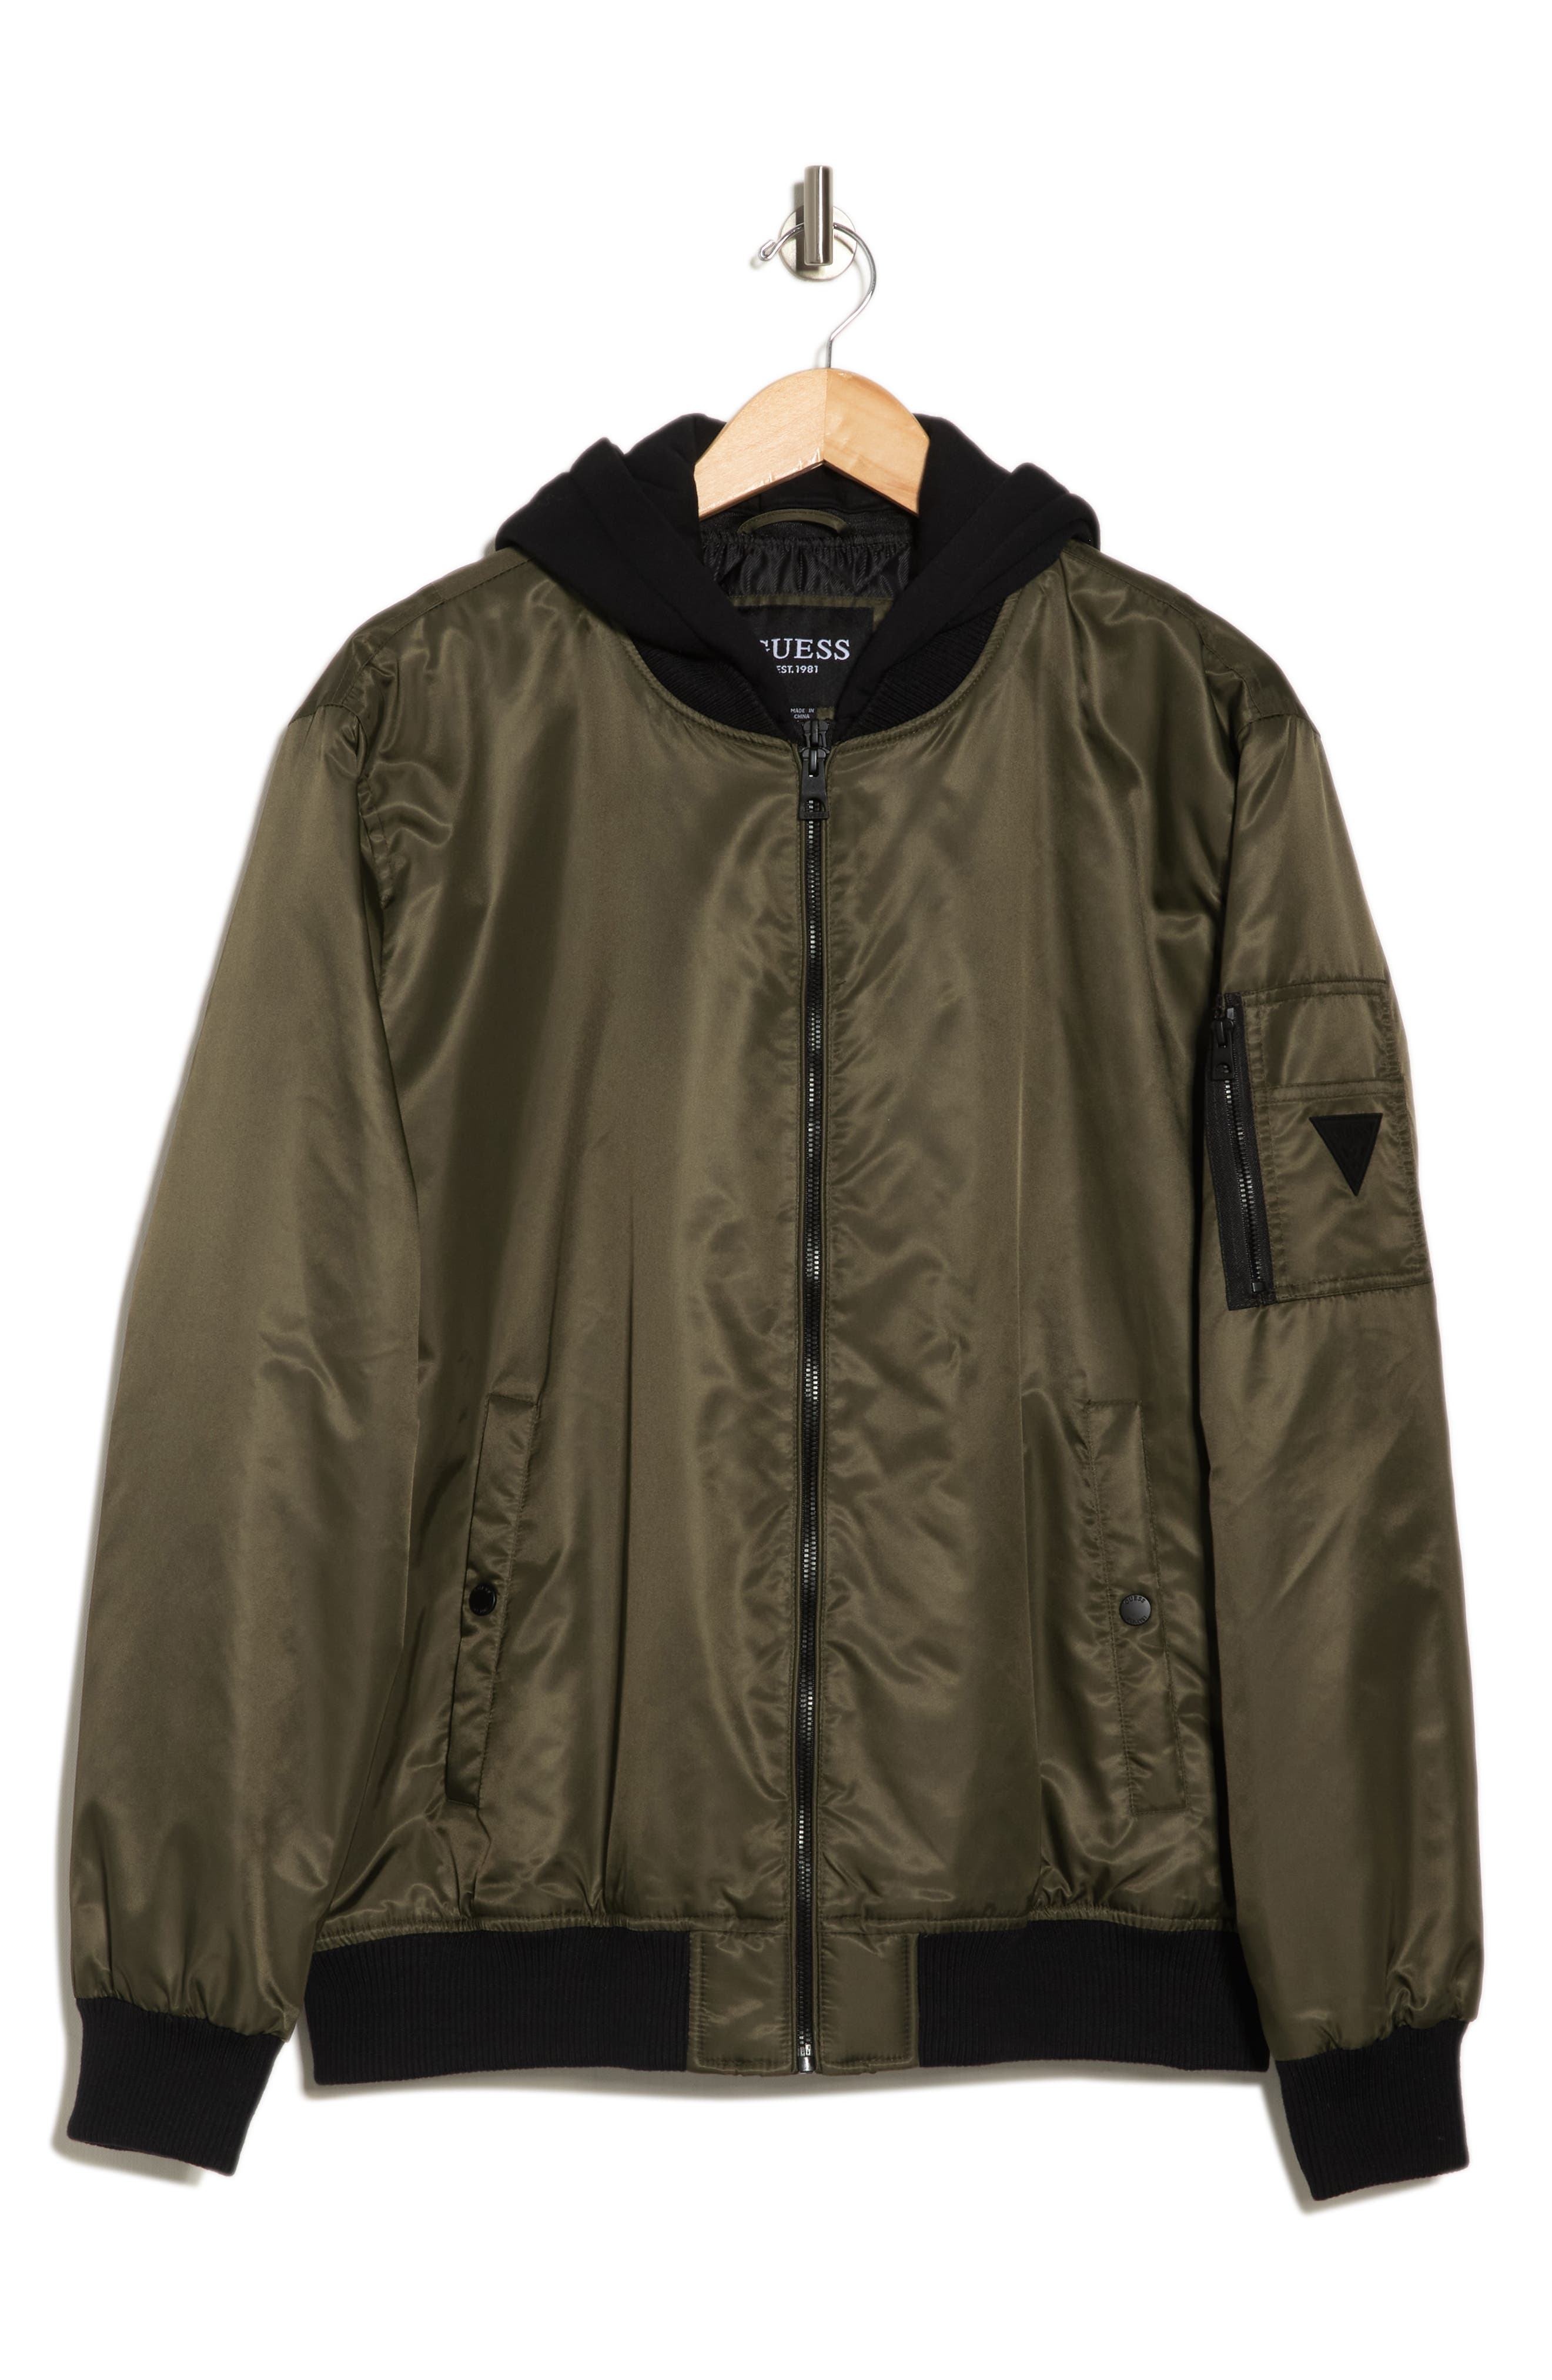 Guess Men's Bomber Jacket With Removable Hooded Inset In Olive | ModeSens